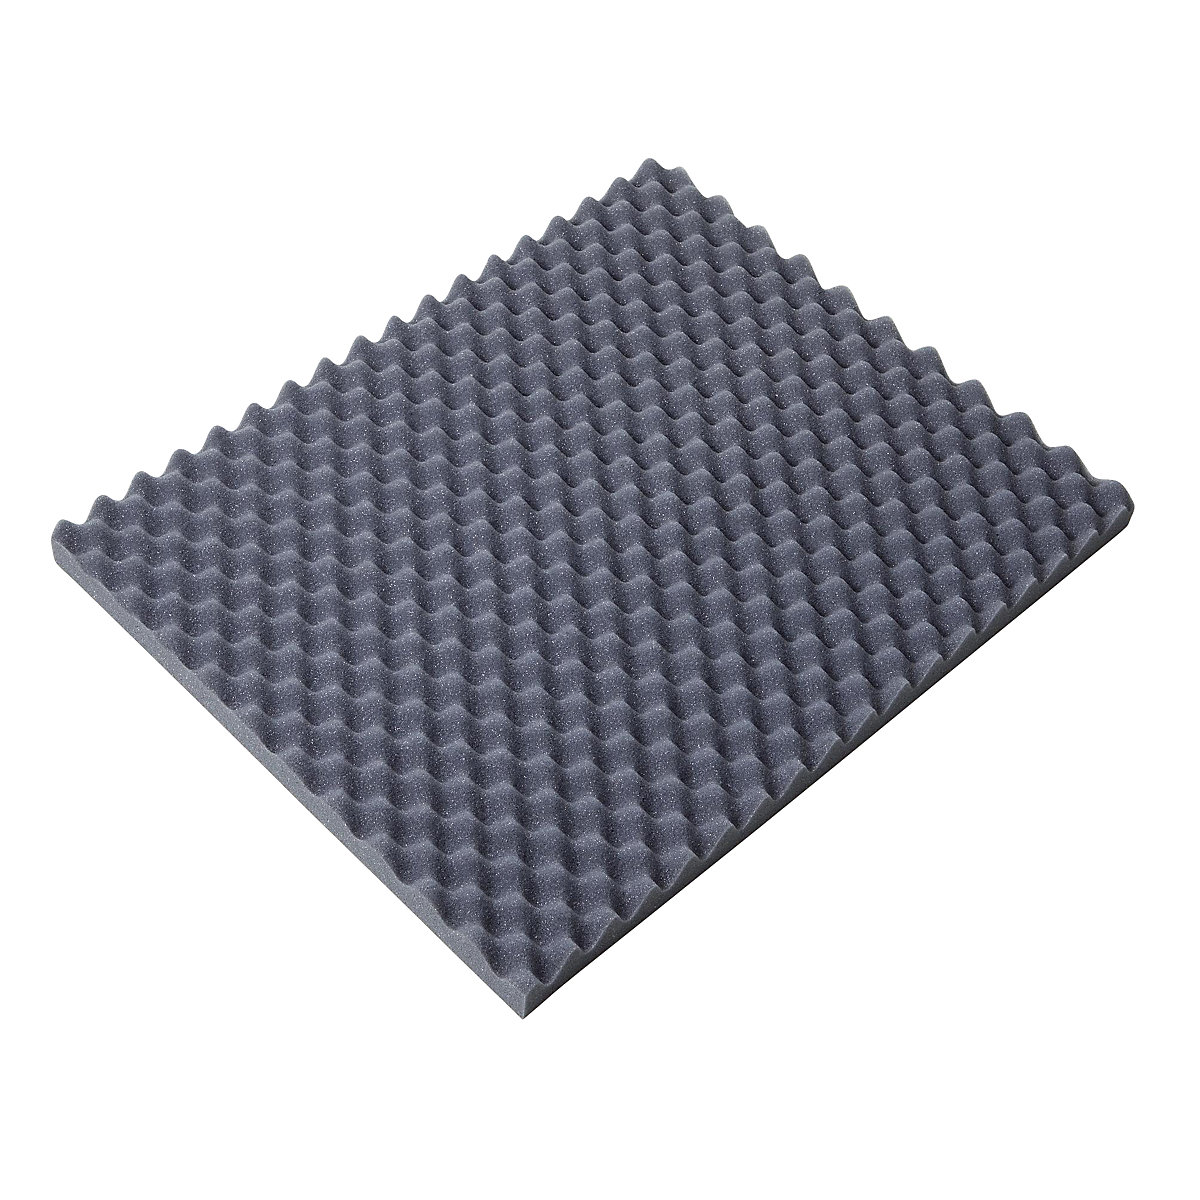 Egg crate foam sheet, 40 mm thick, LxW 600 x 400 mm, pack of 26-9